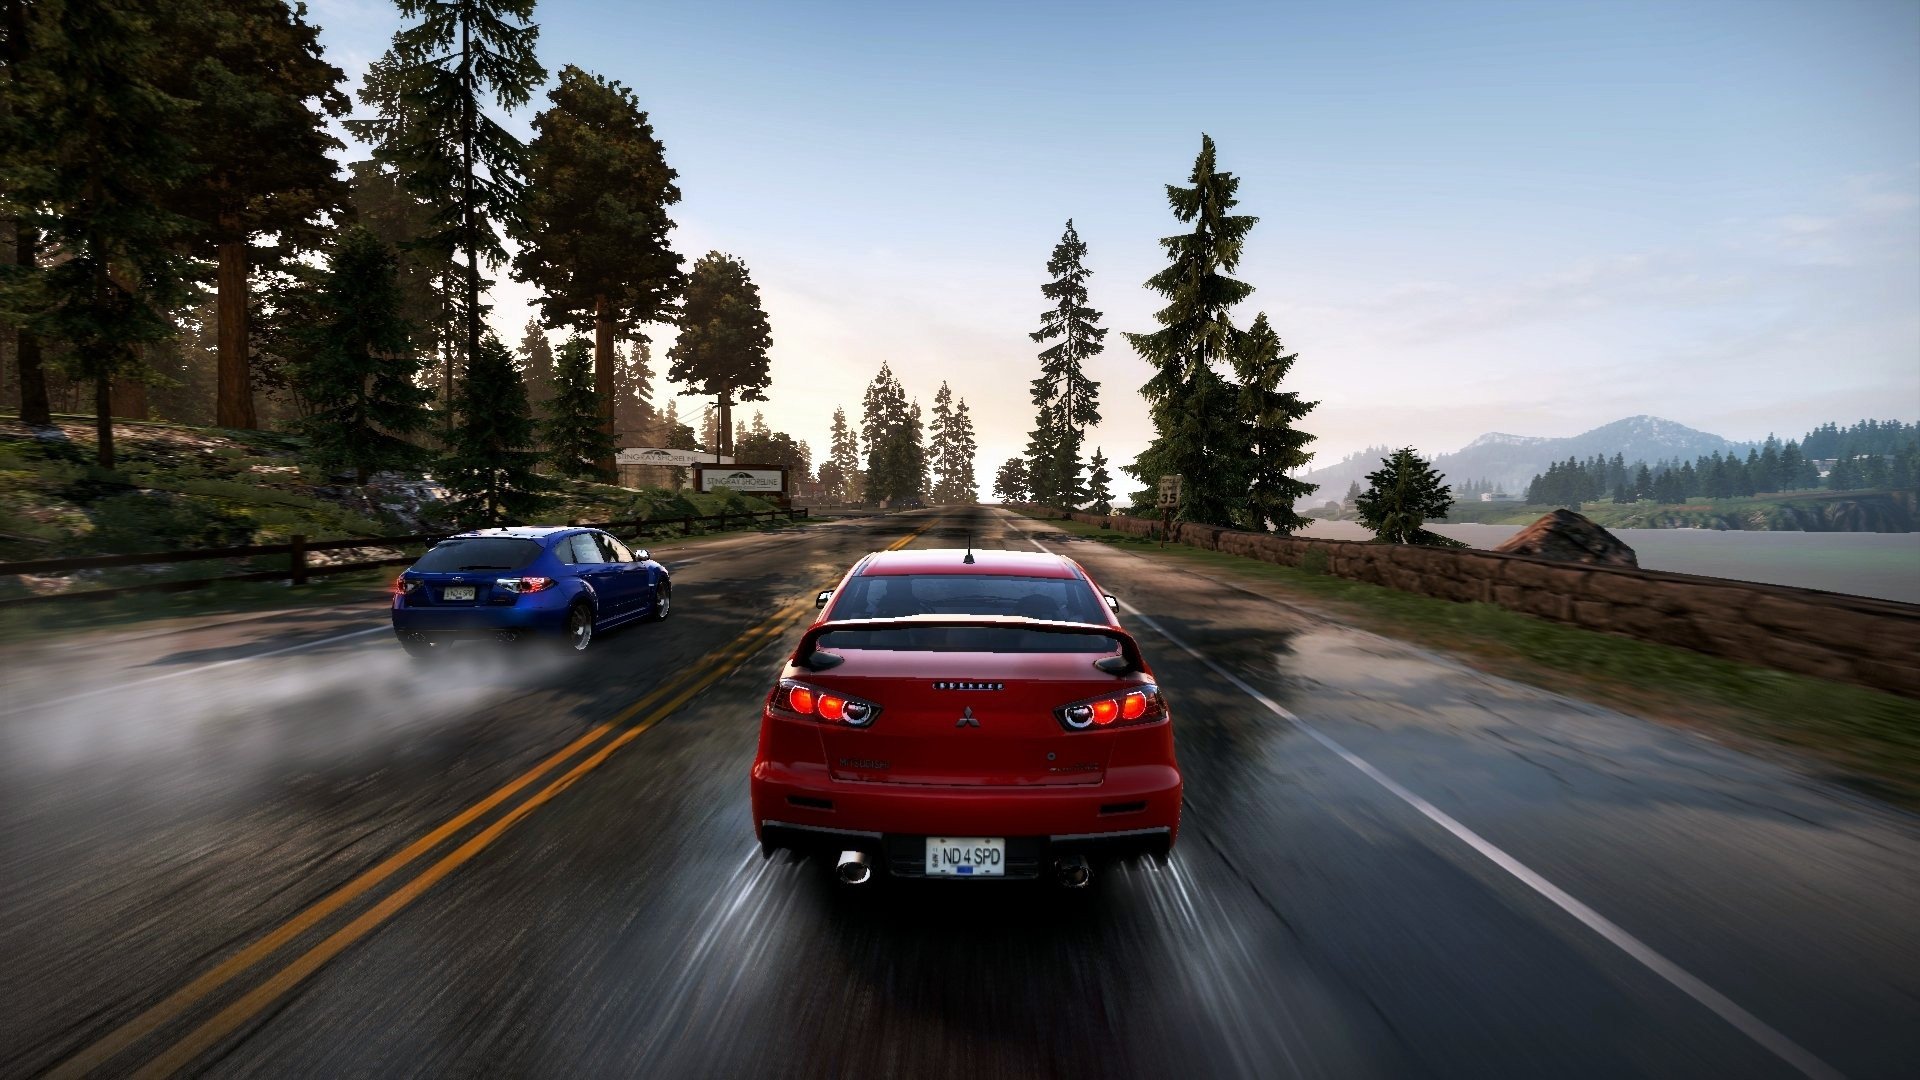 video, Games, Blue, Red, Rain, Cars, Need, For, Speed, Need, For, Speed, Hot, Pursuit, Mitsubishi, Lancer, Evolution, X, Games, Jdm, Japanese, Domestic, Market, Seacrest, County, Subaru, Impreza, Wrx, Sti, Pc, G Wallpaper